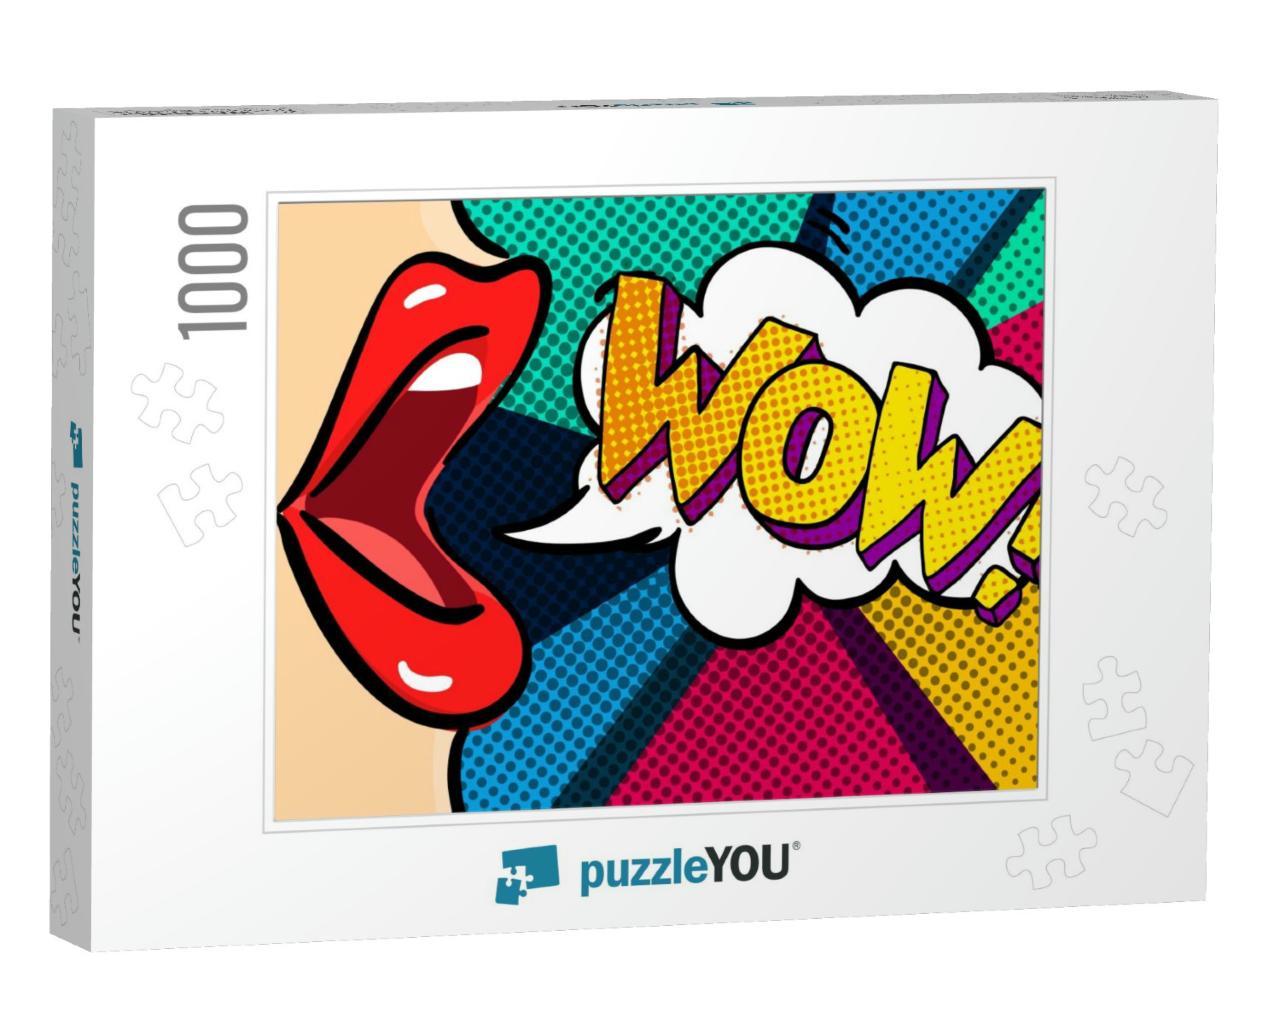 Open Mouth & Wow Message in Pop Art Style, Promotional Ba... Jigsaw Puzzle with 1000 pieces